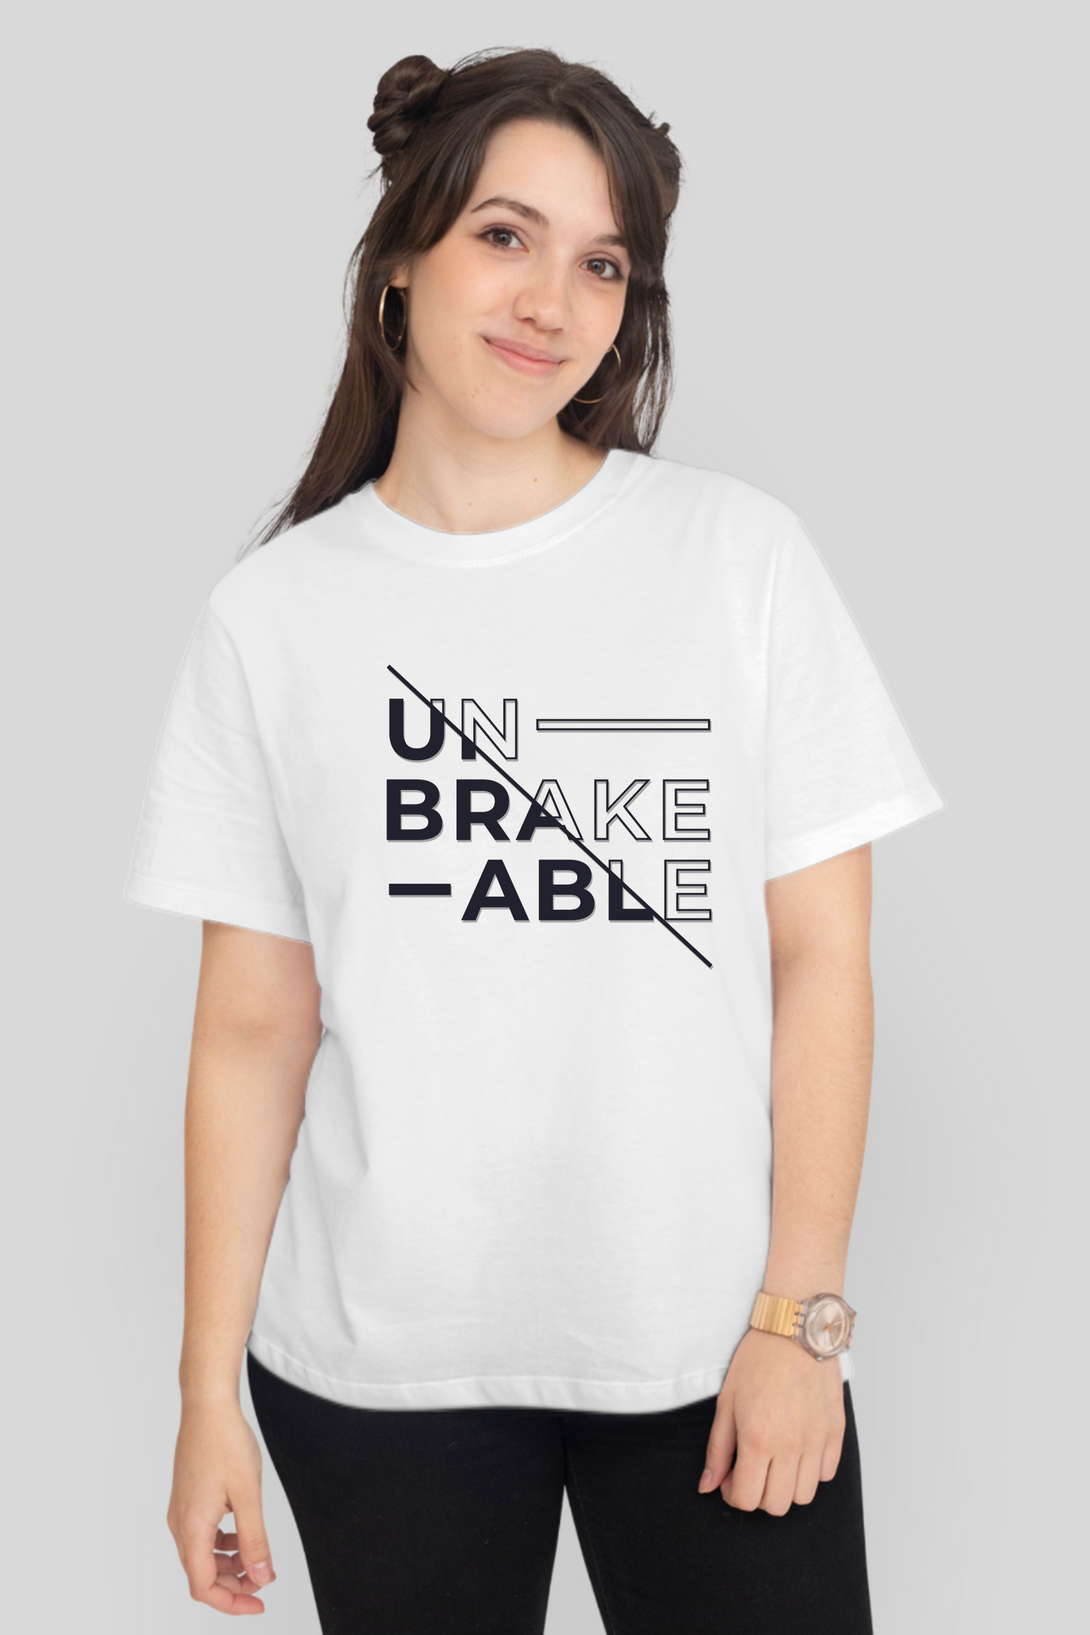 Unbreakable Printed T-Shirt For Women - WowWaves - 12